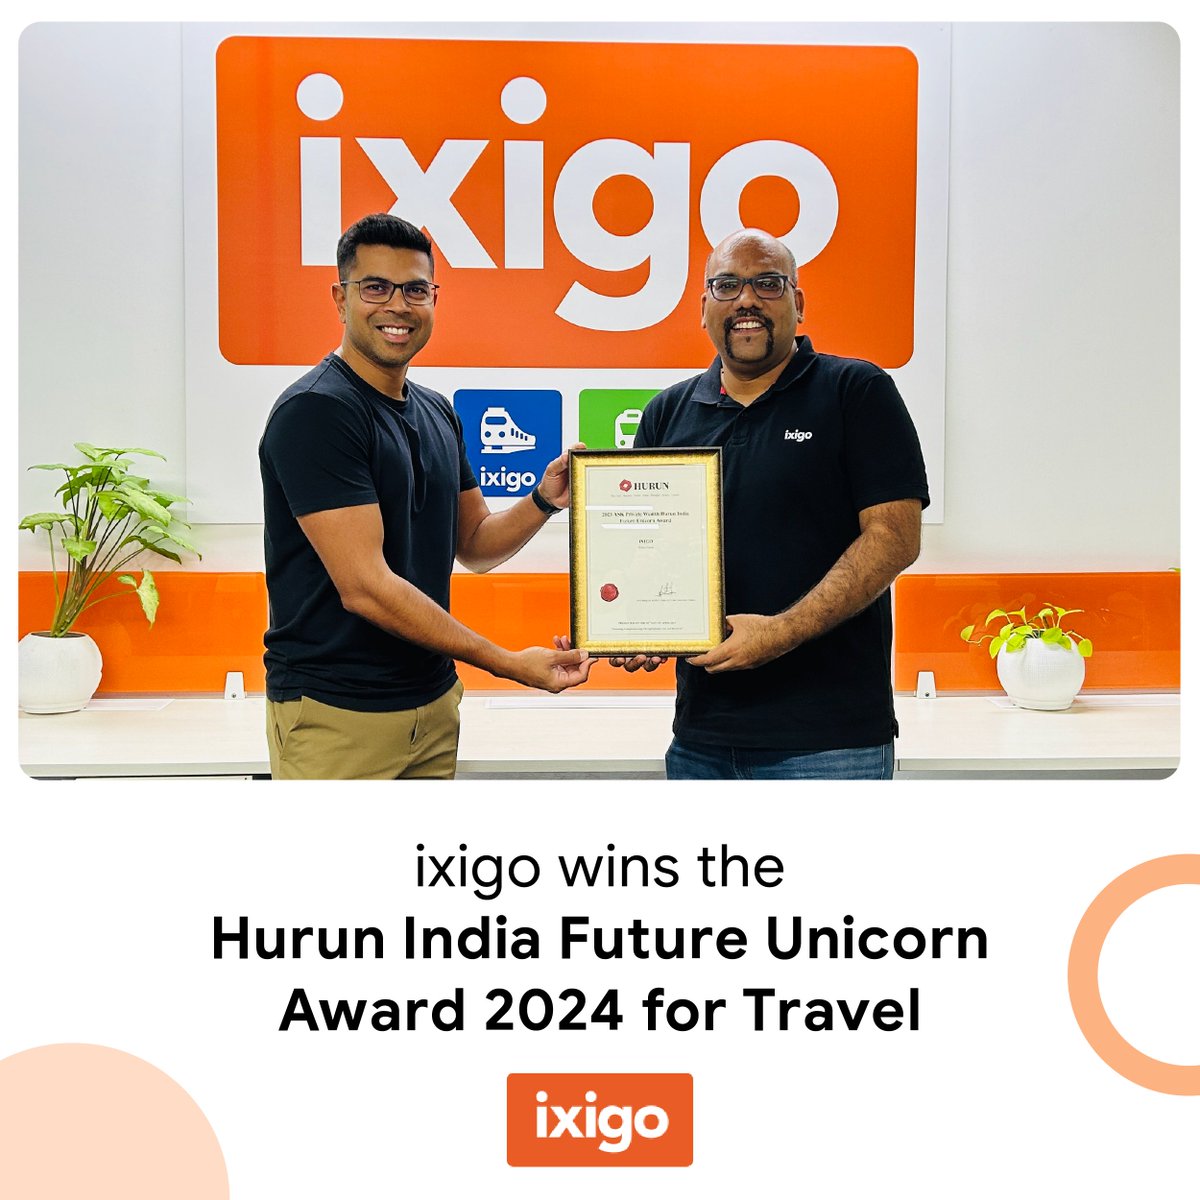 🎉Exciting news! ixigo has bagged the Hurun India Future Unicorn Award 2024 - Travel 
Proud to be recognized for our impact on the Indian startup scene. Thanks to our incredible team & everyone who supports us! 🚀 
#HurunIndia #StartupSuccess #ixigo